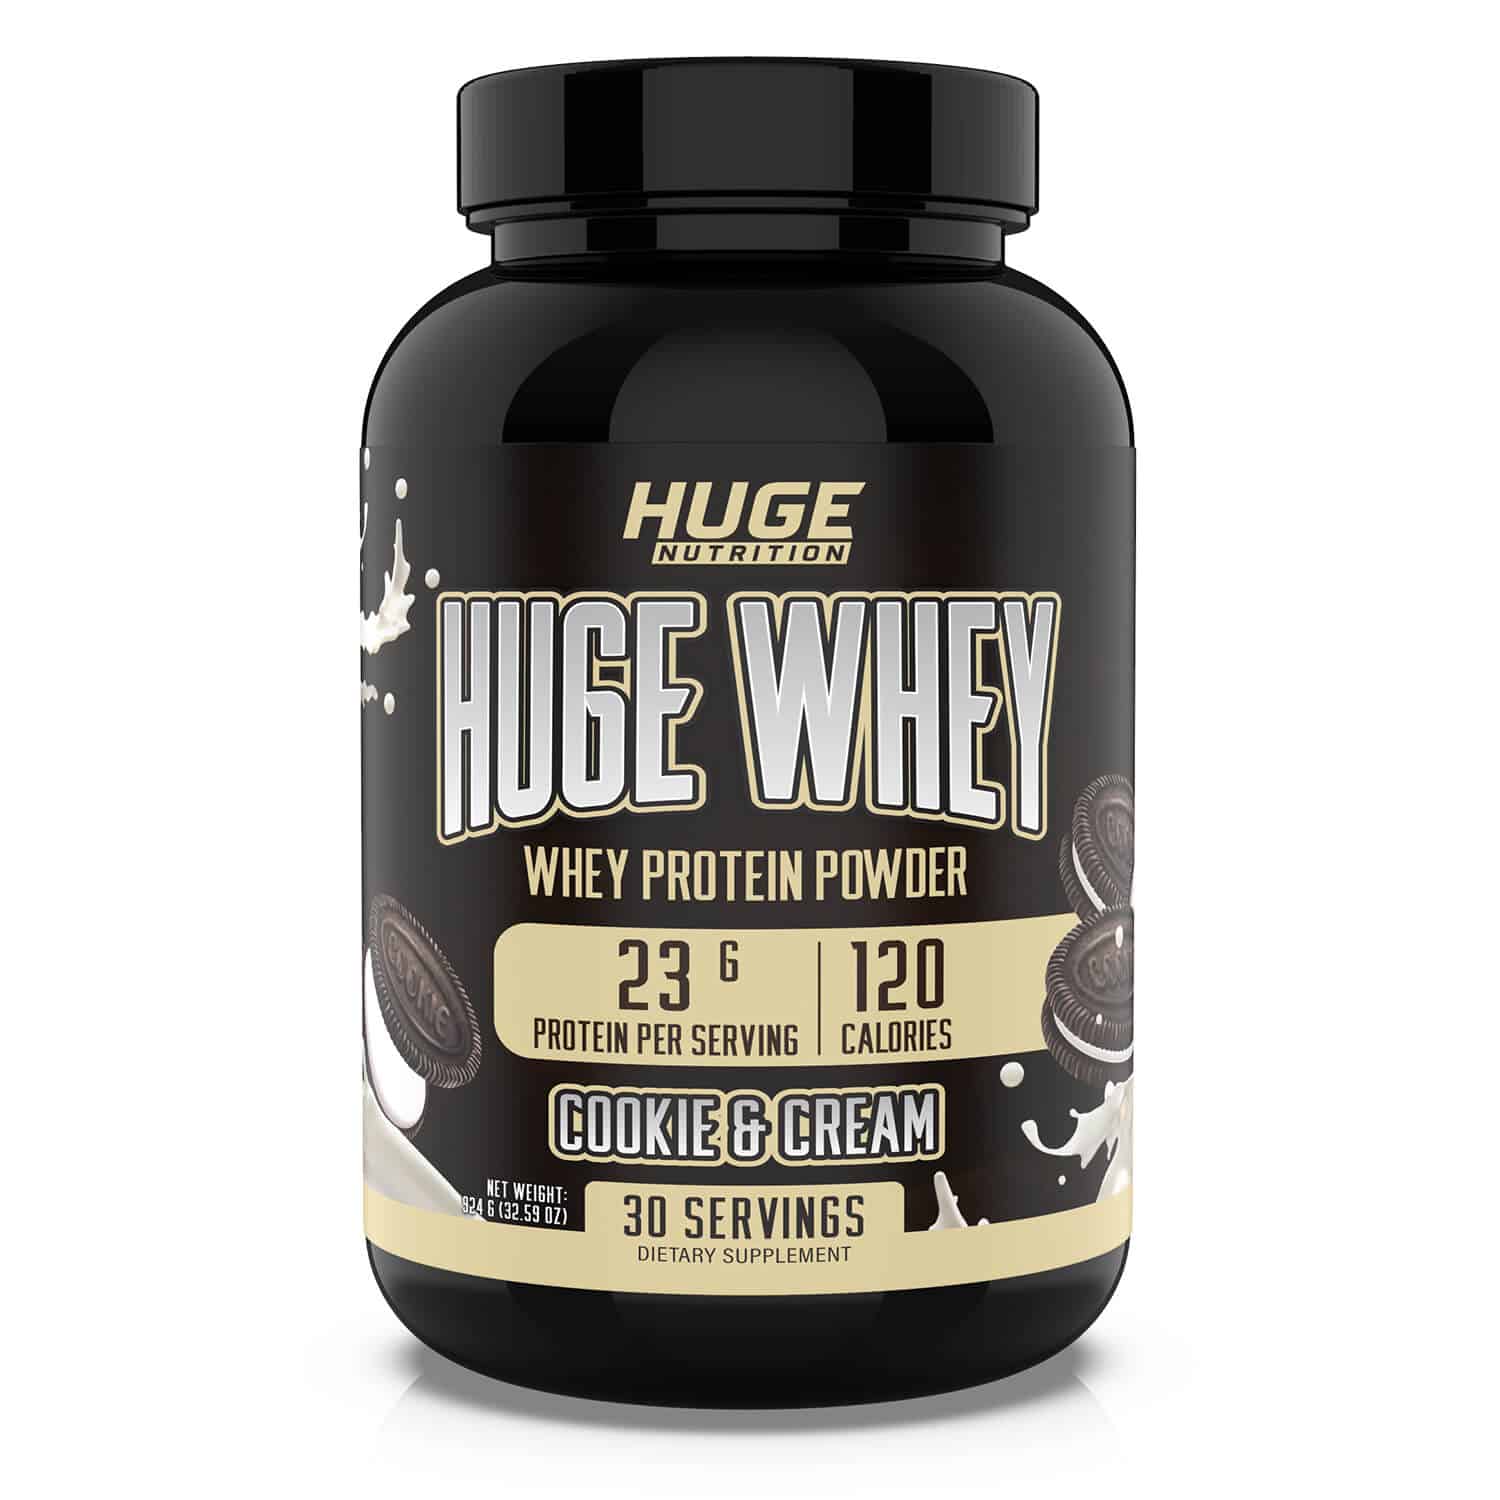 Huge Whey - Whey Protein Powder (30 Servings)